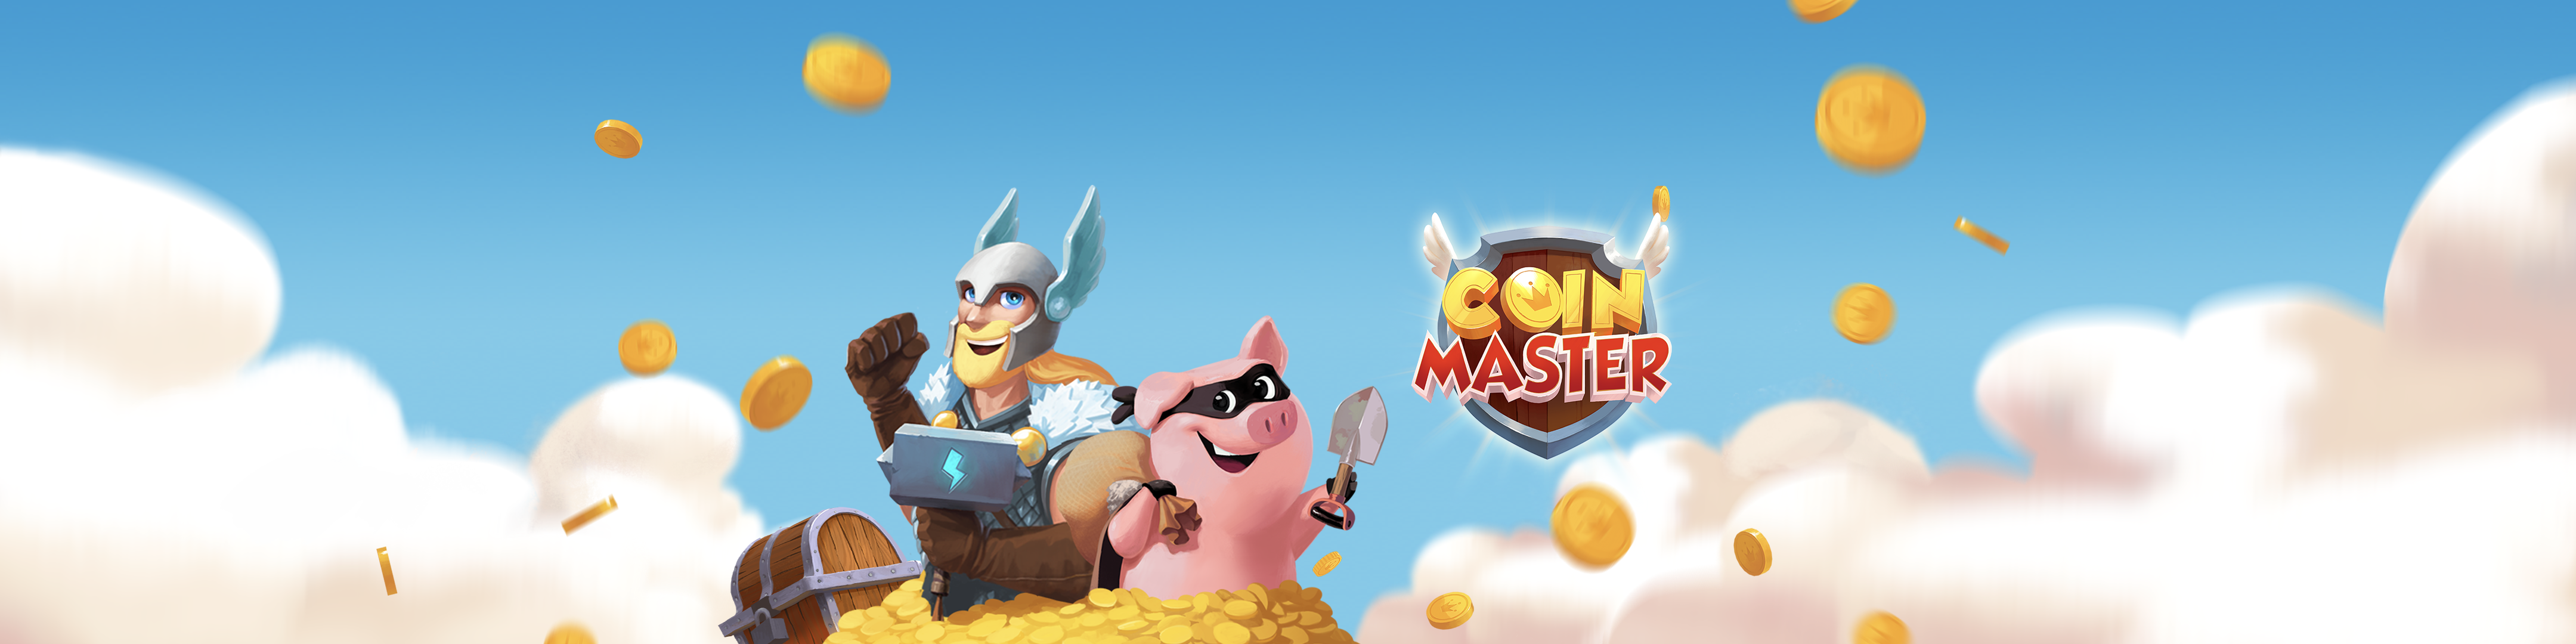 Coin Master Overview Apple App Store Australia